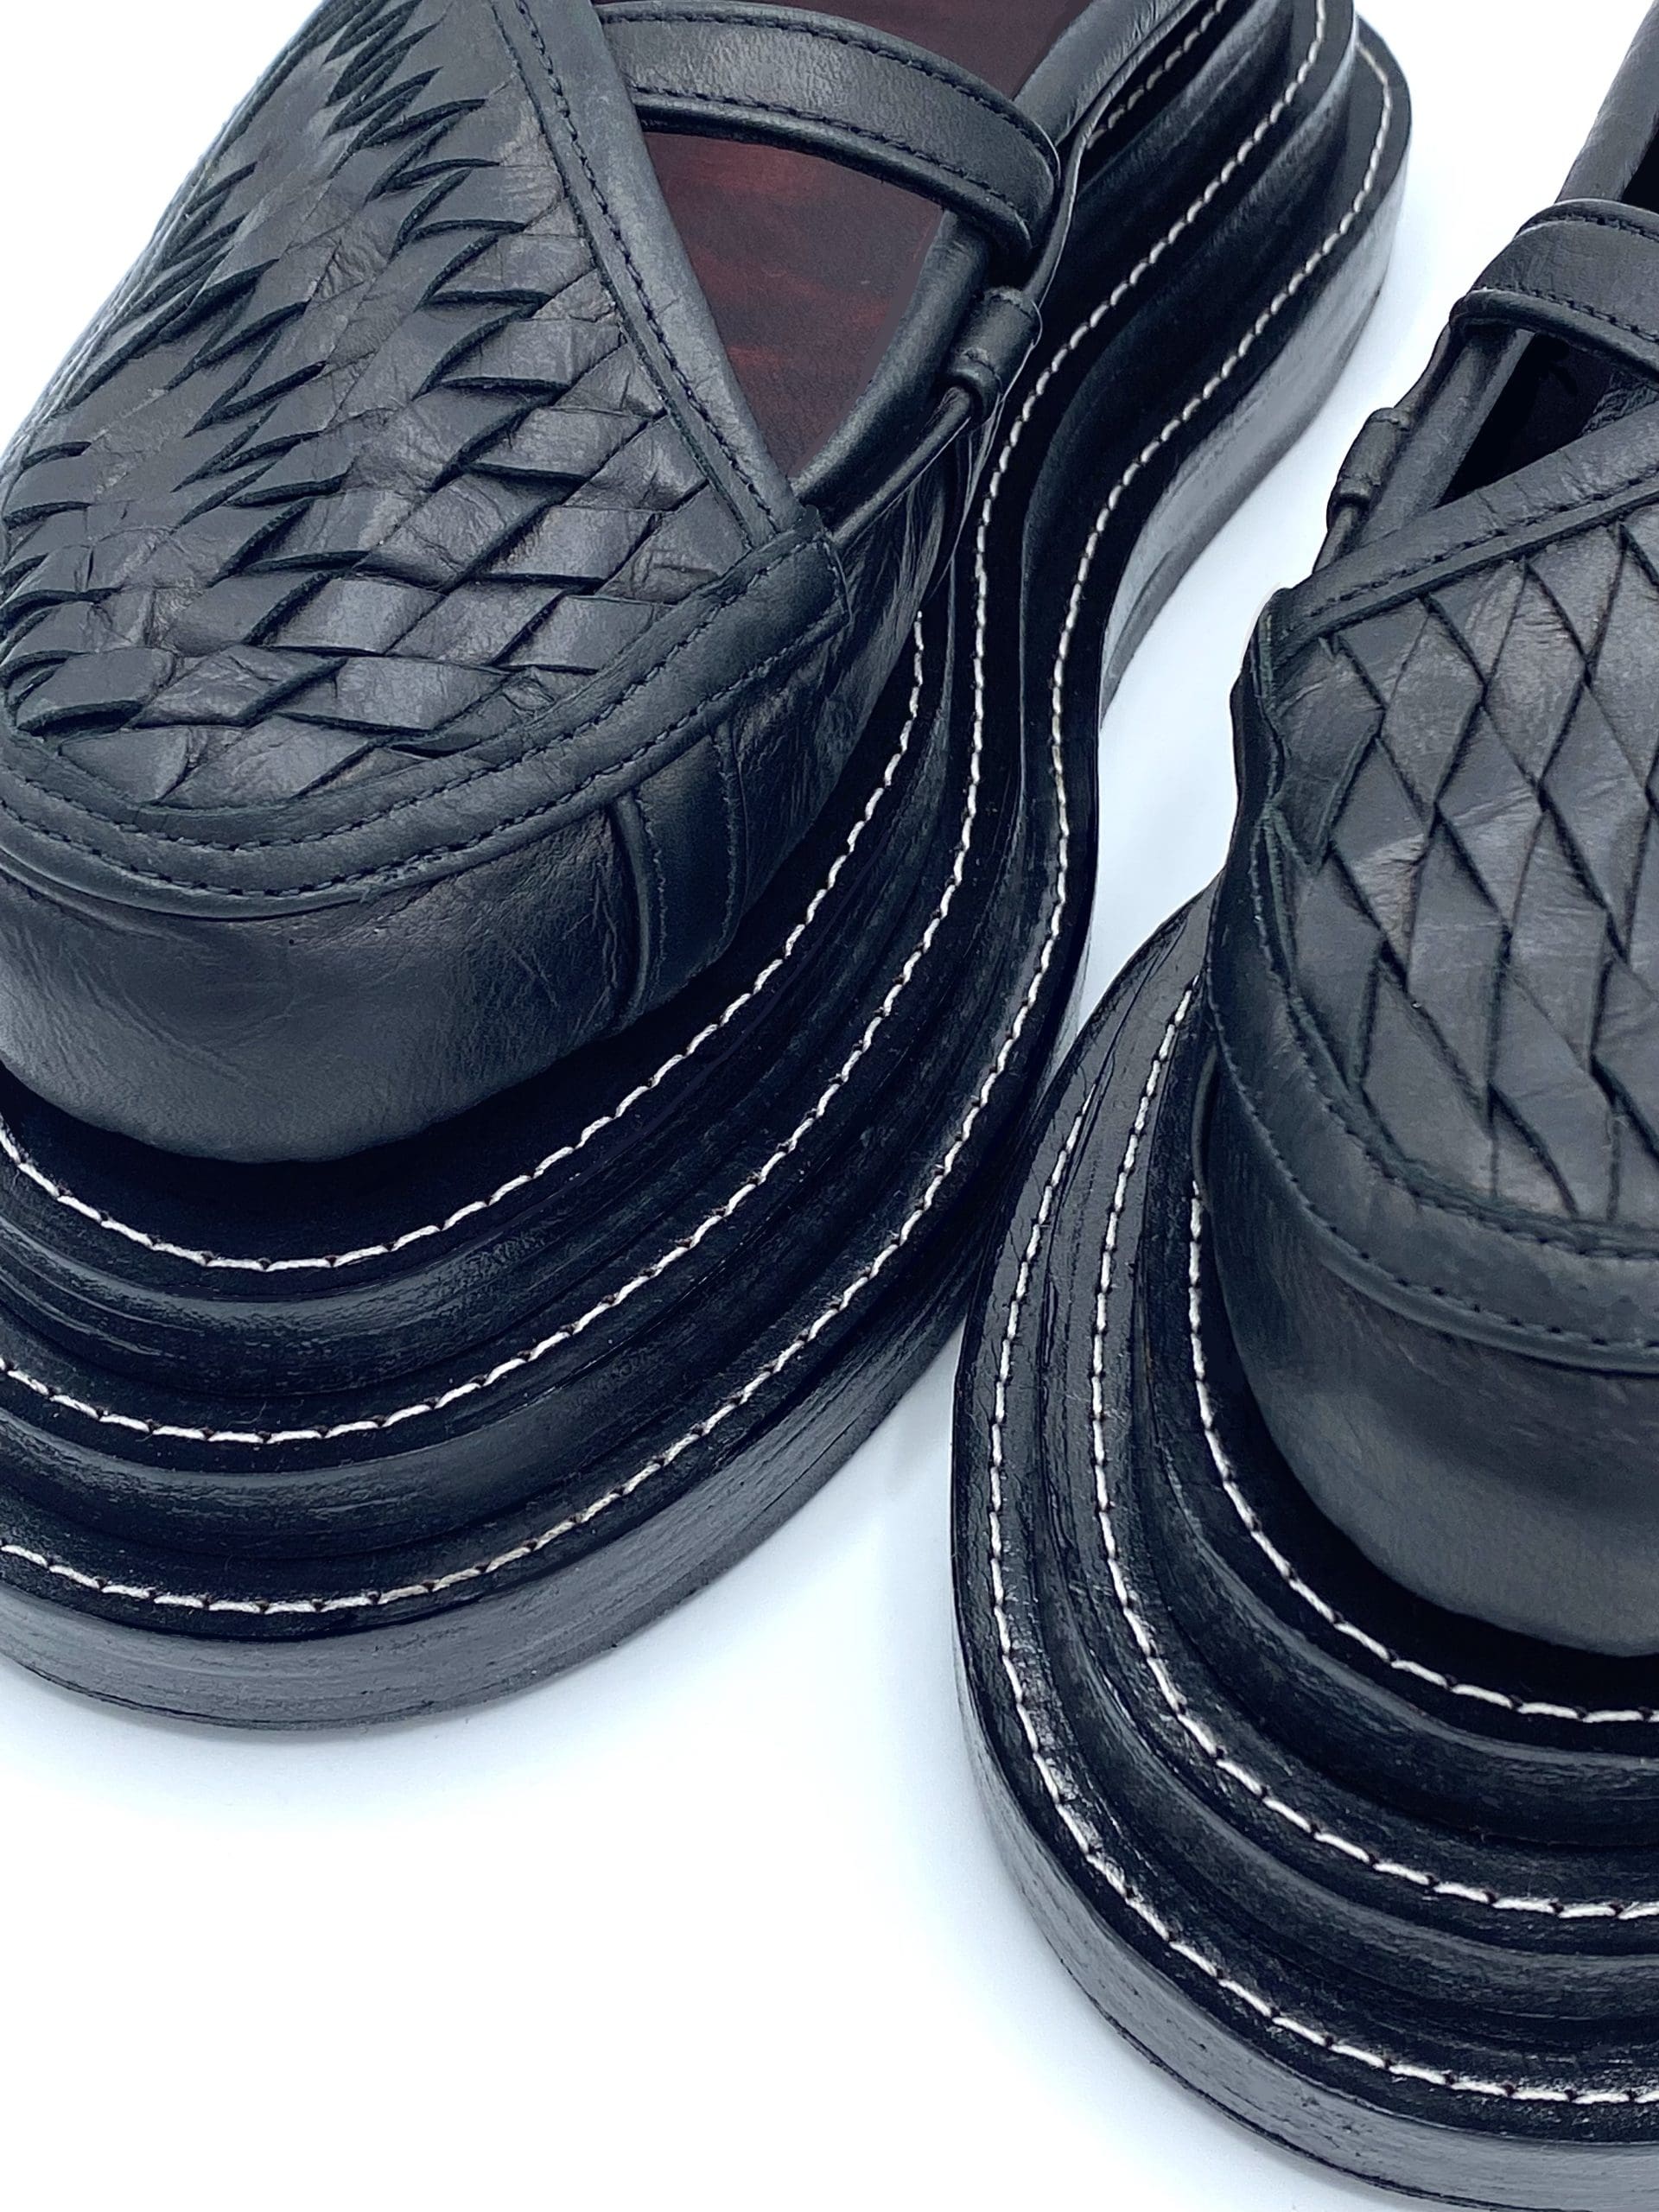 Closeup photo of two black leather shoes with white stitching against a white background. The tops of the shoes are weft, and they have straps near the ankle.